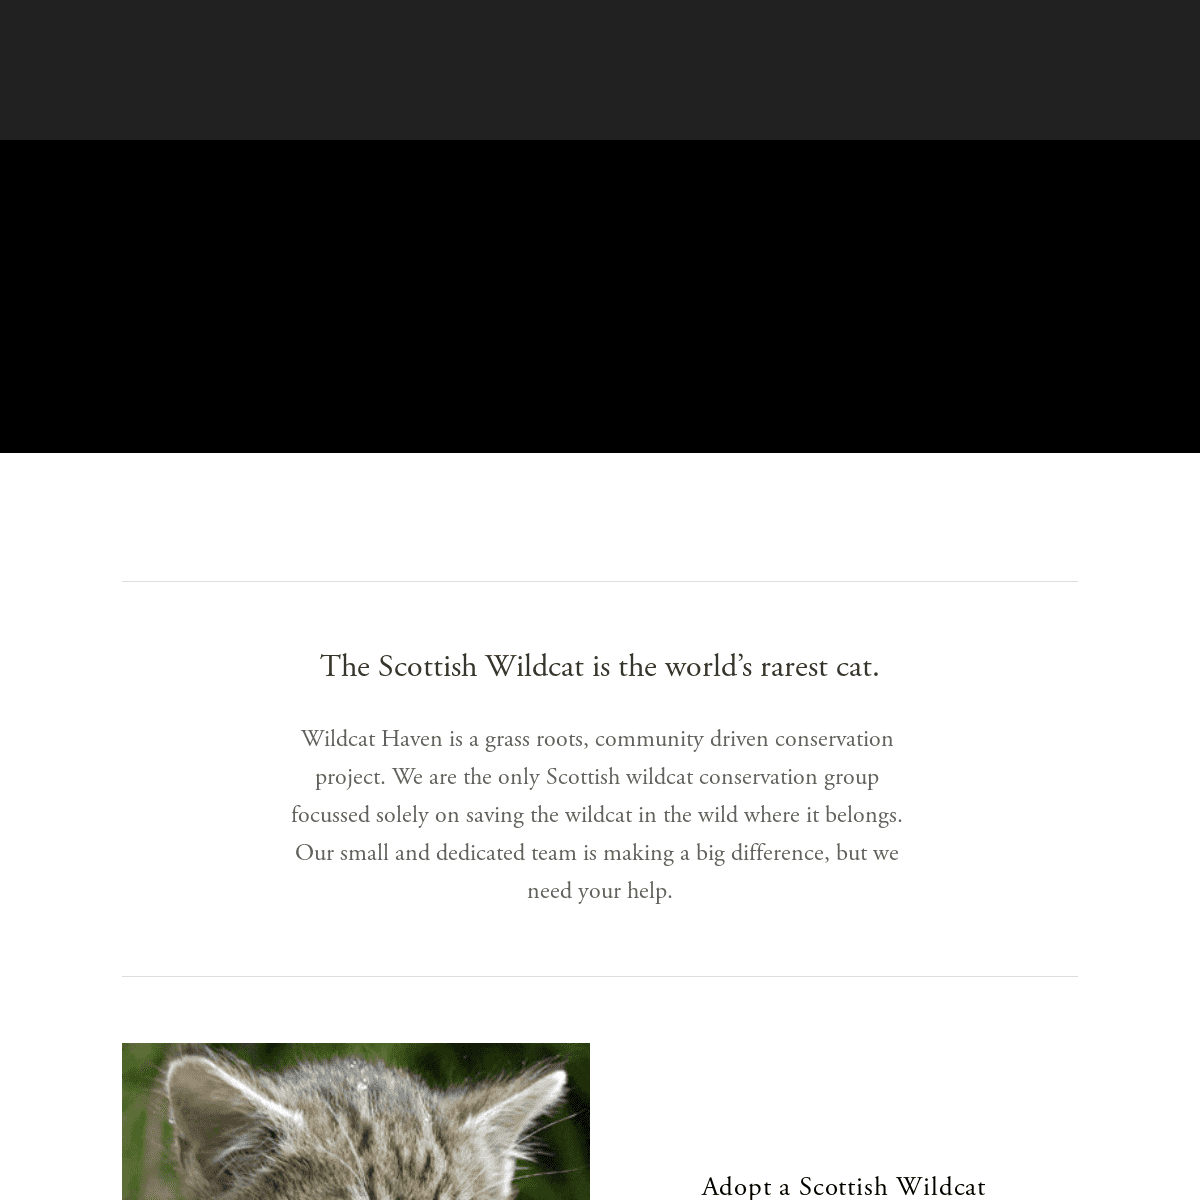 A complete backup of https://wildcathaven.com